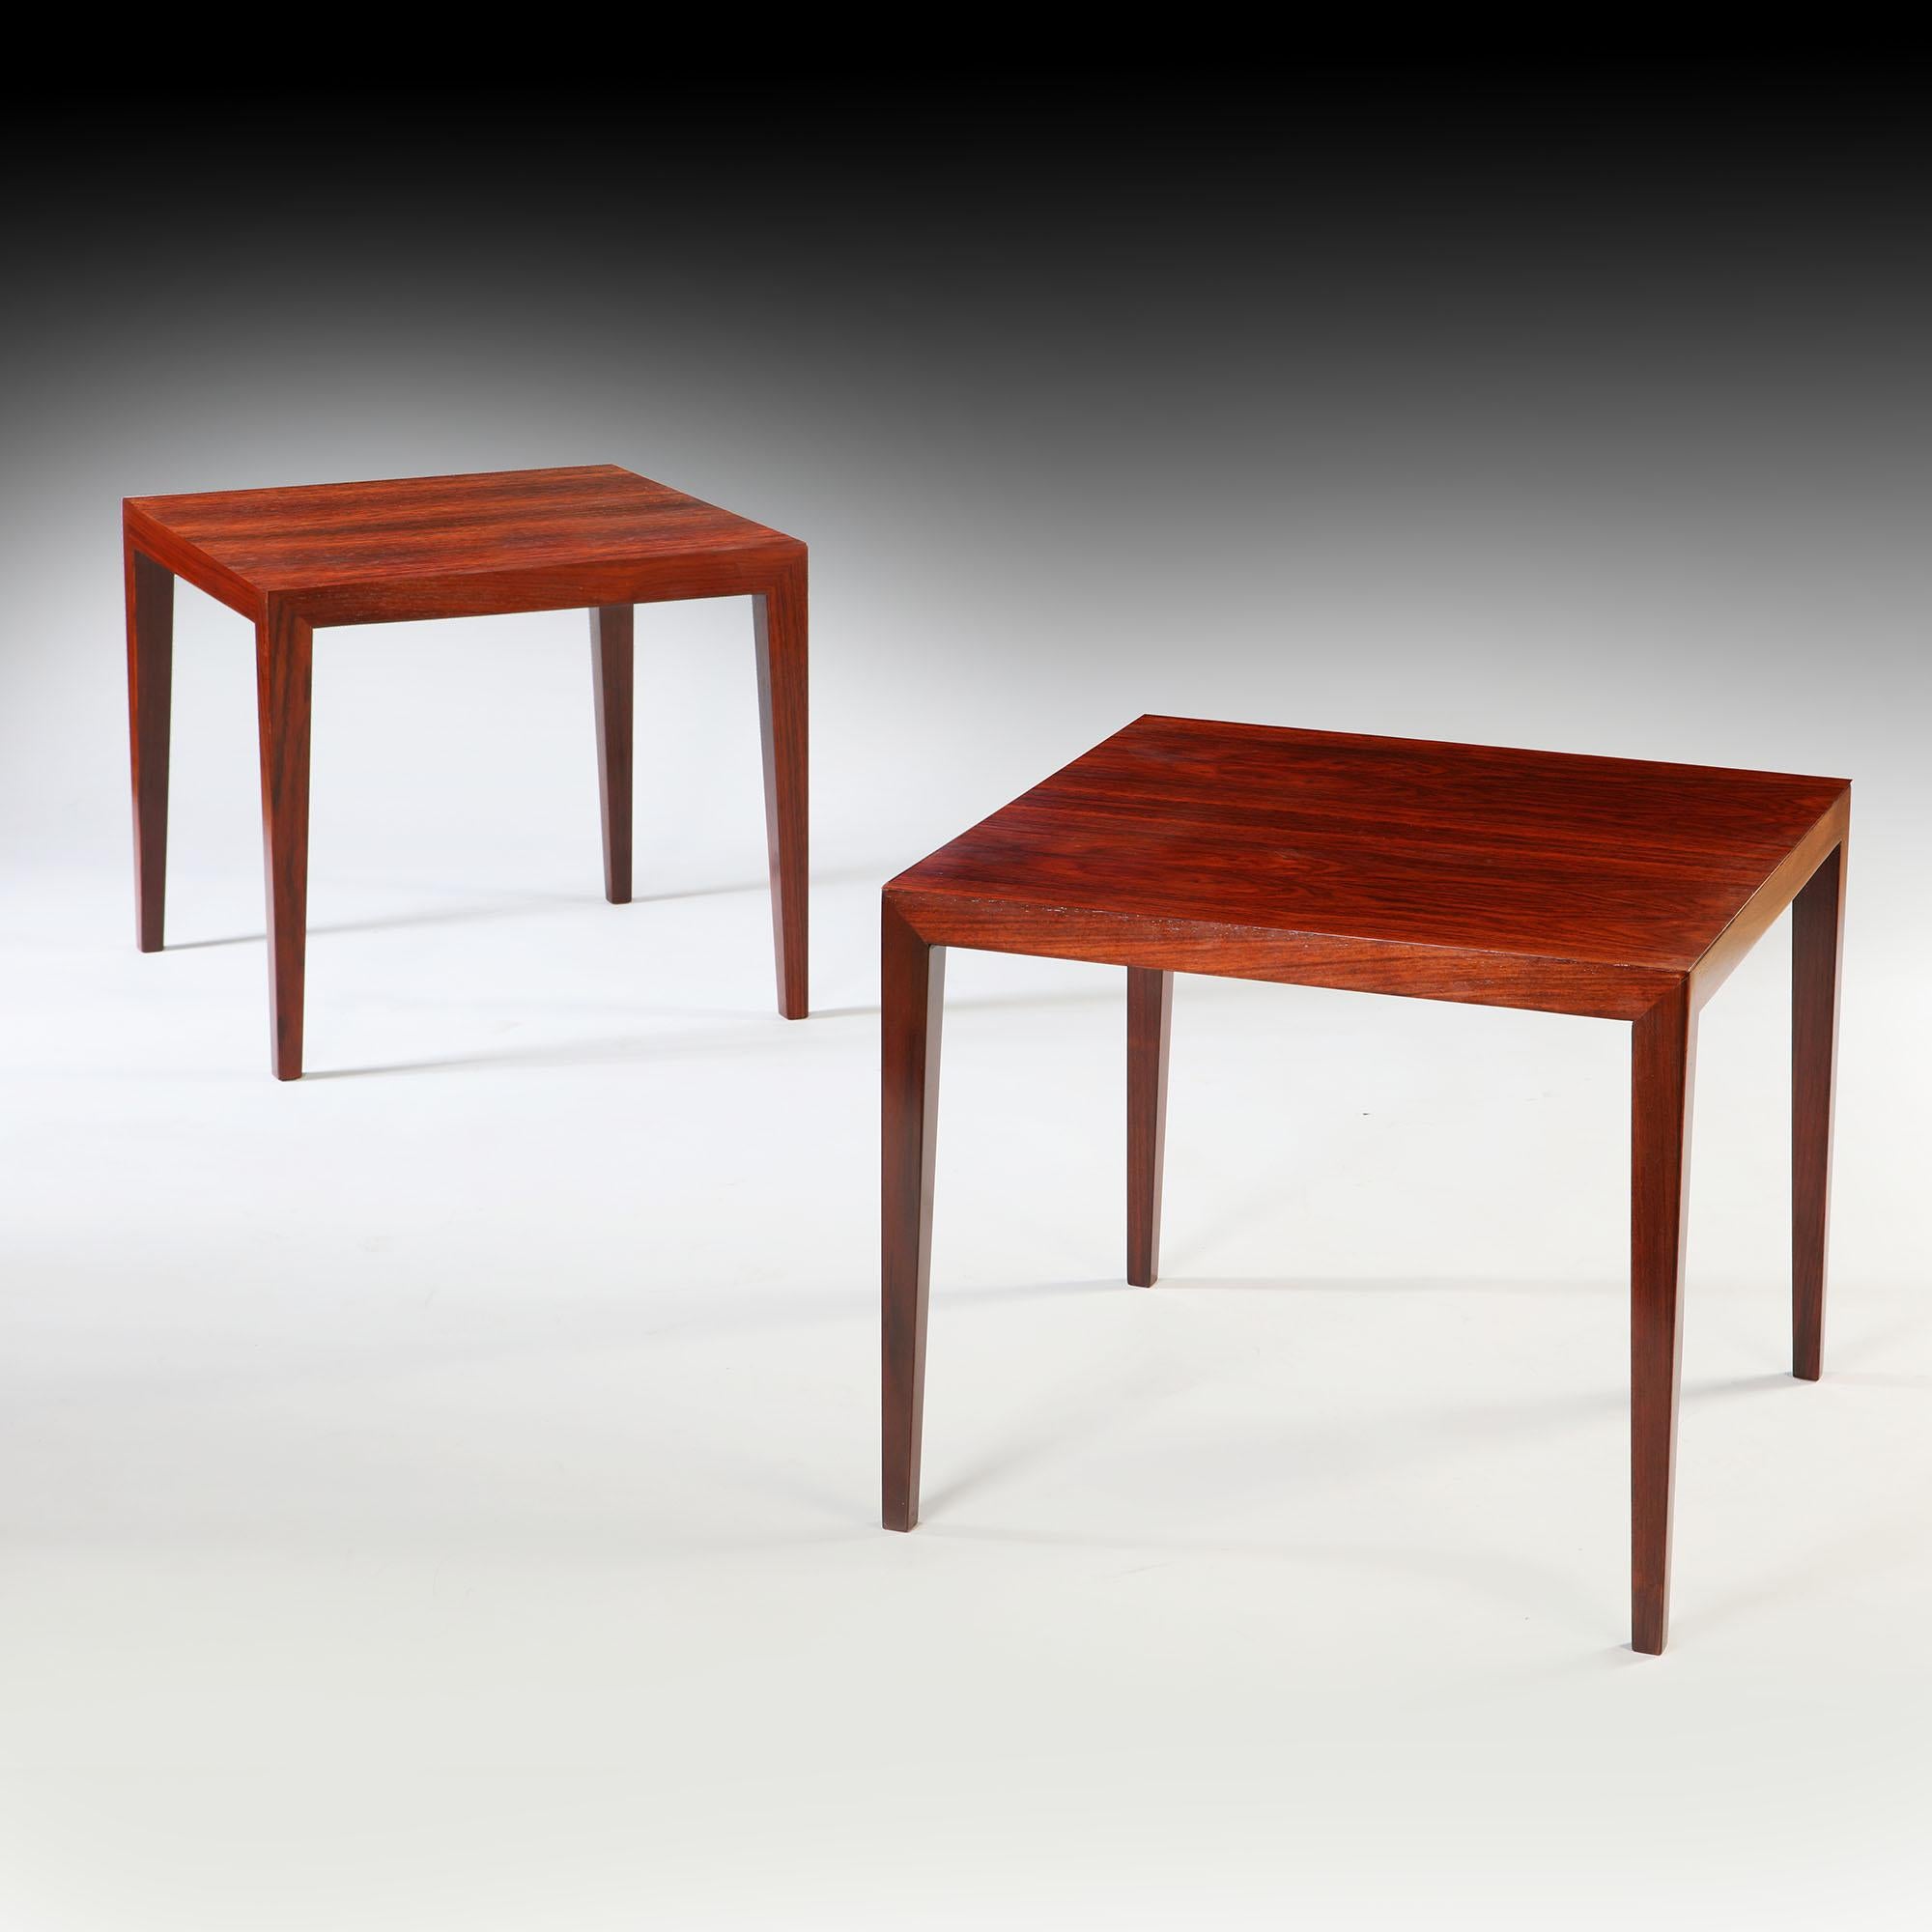 Denmark, circa 1950

A near pair of mid-twentieth century Danish Rosewood square occasional tables with tapering legs, attributed to Severin Hansen.

Table one:

Height       50.00cm
Width        59.00cm
Depth        59.00cm

Table two:

Height     